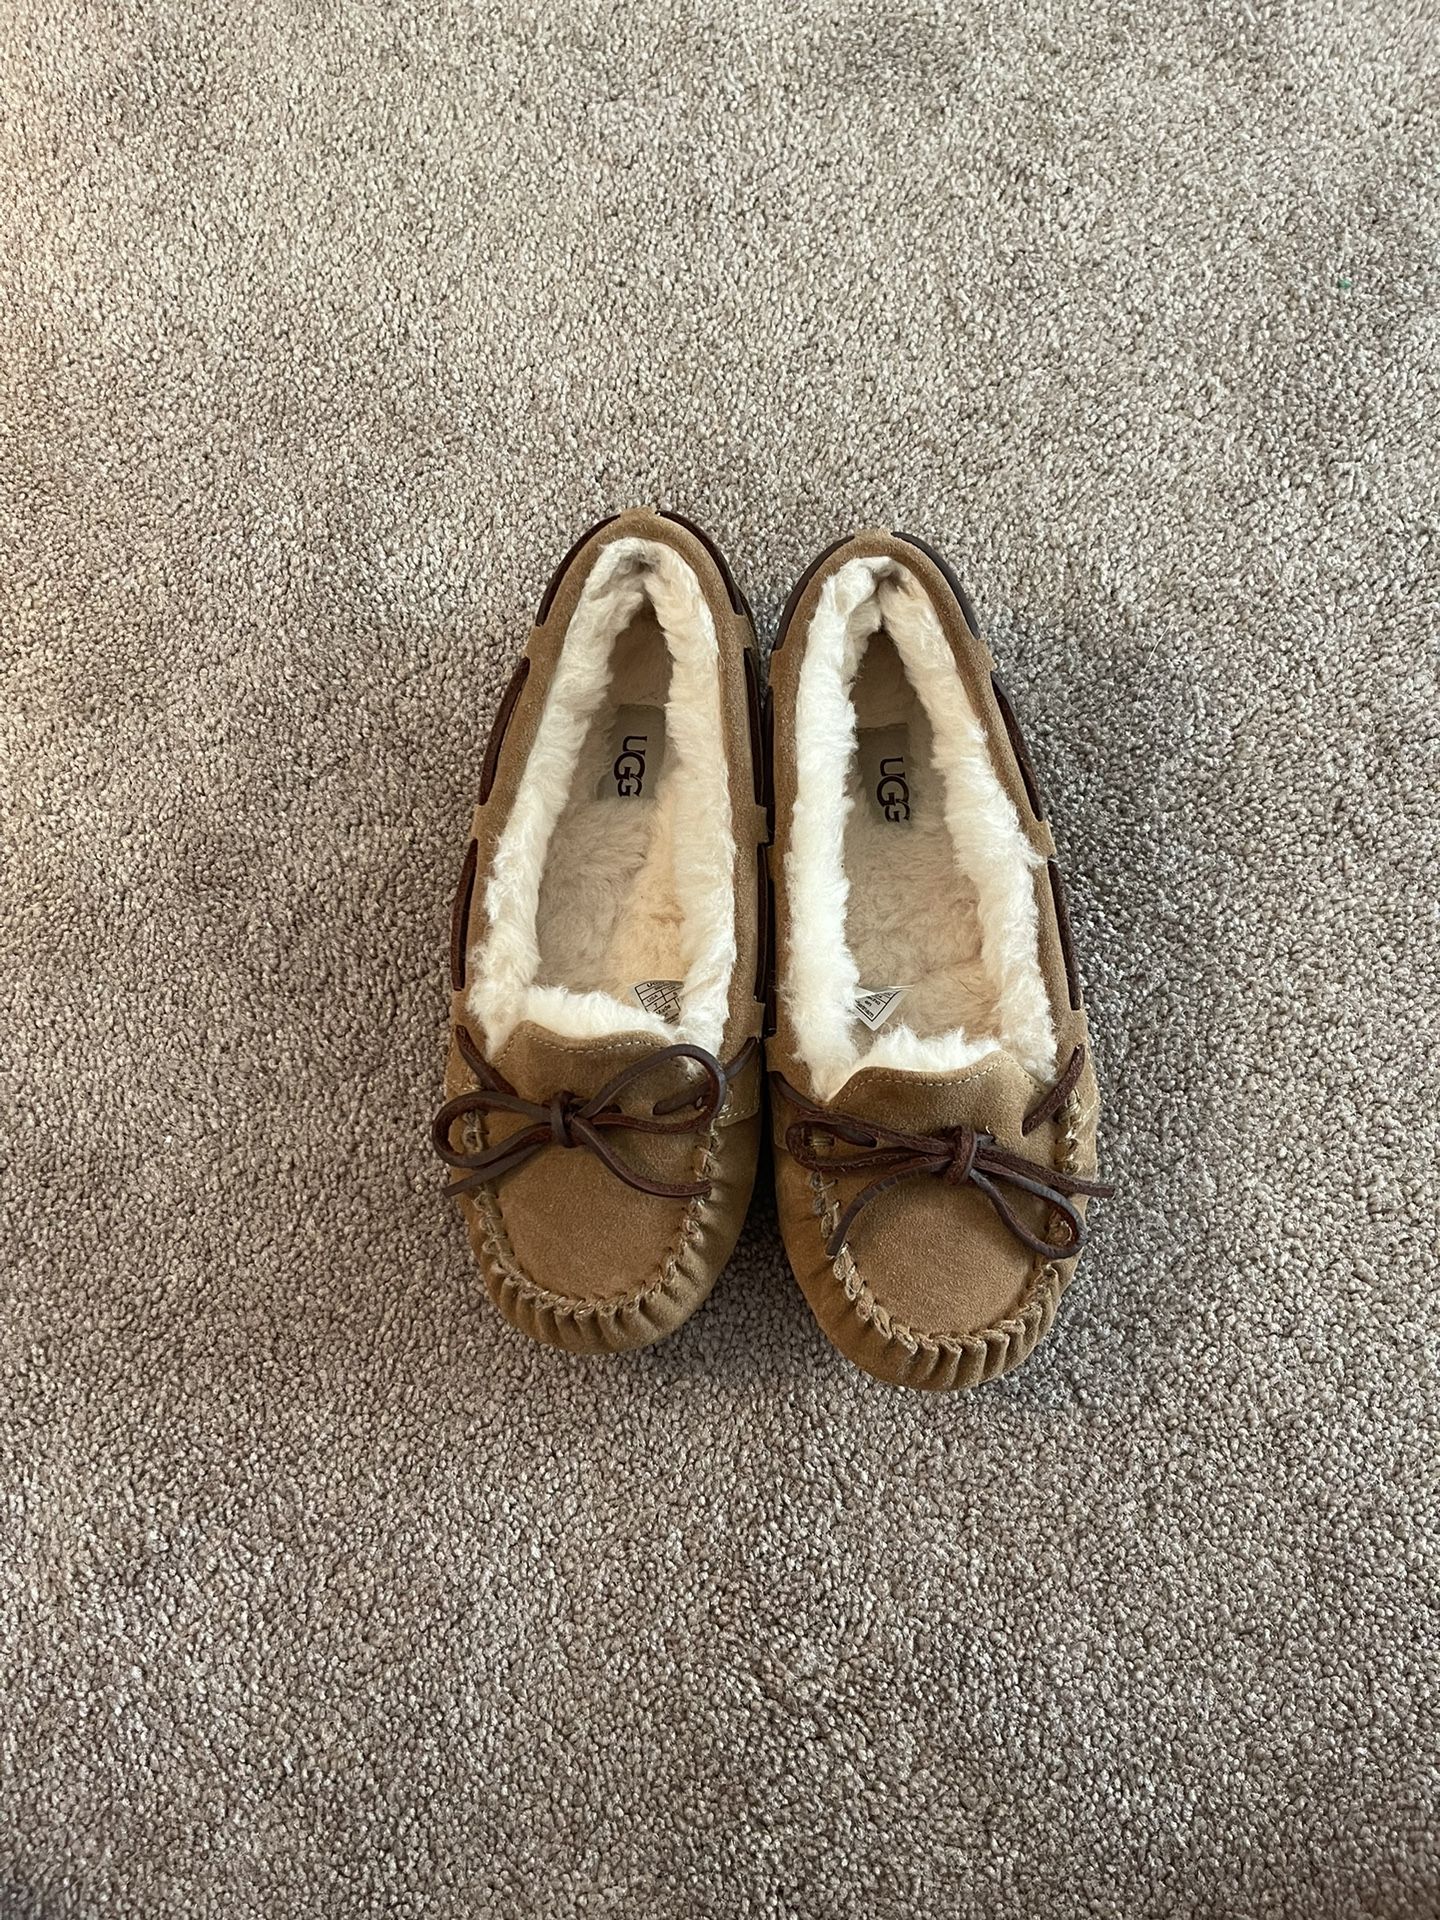 Woman’s Ugg Slippers